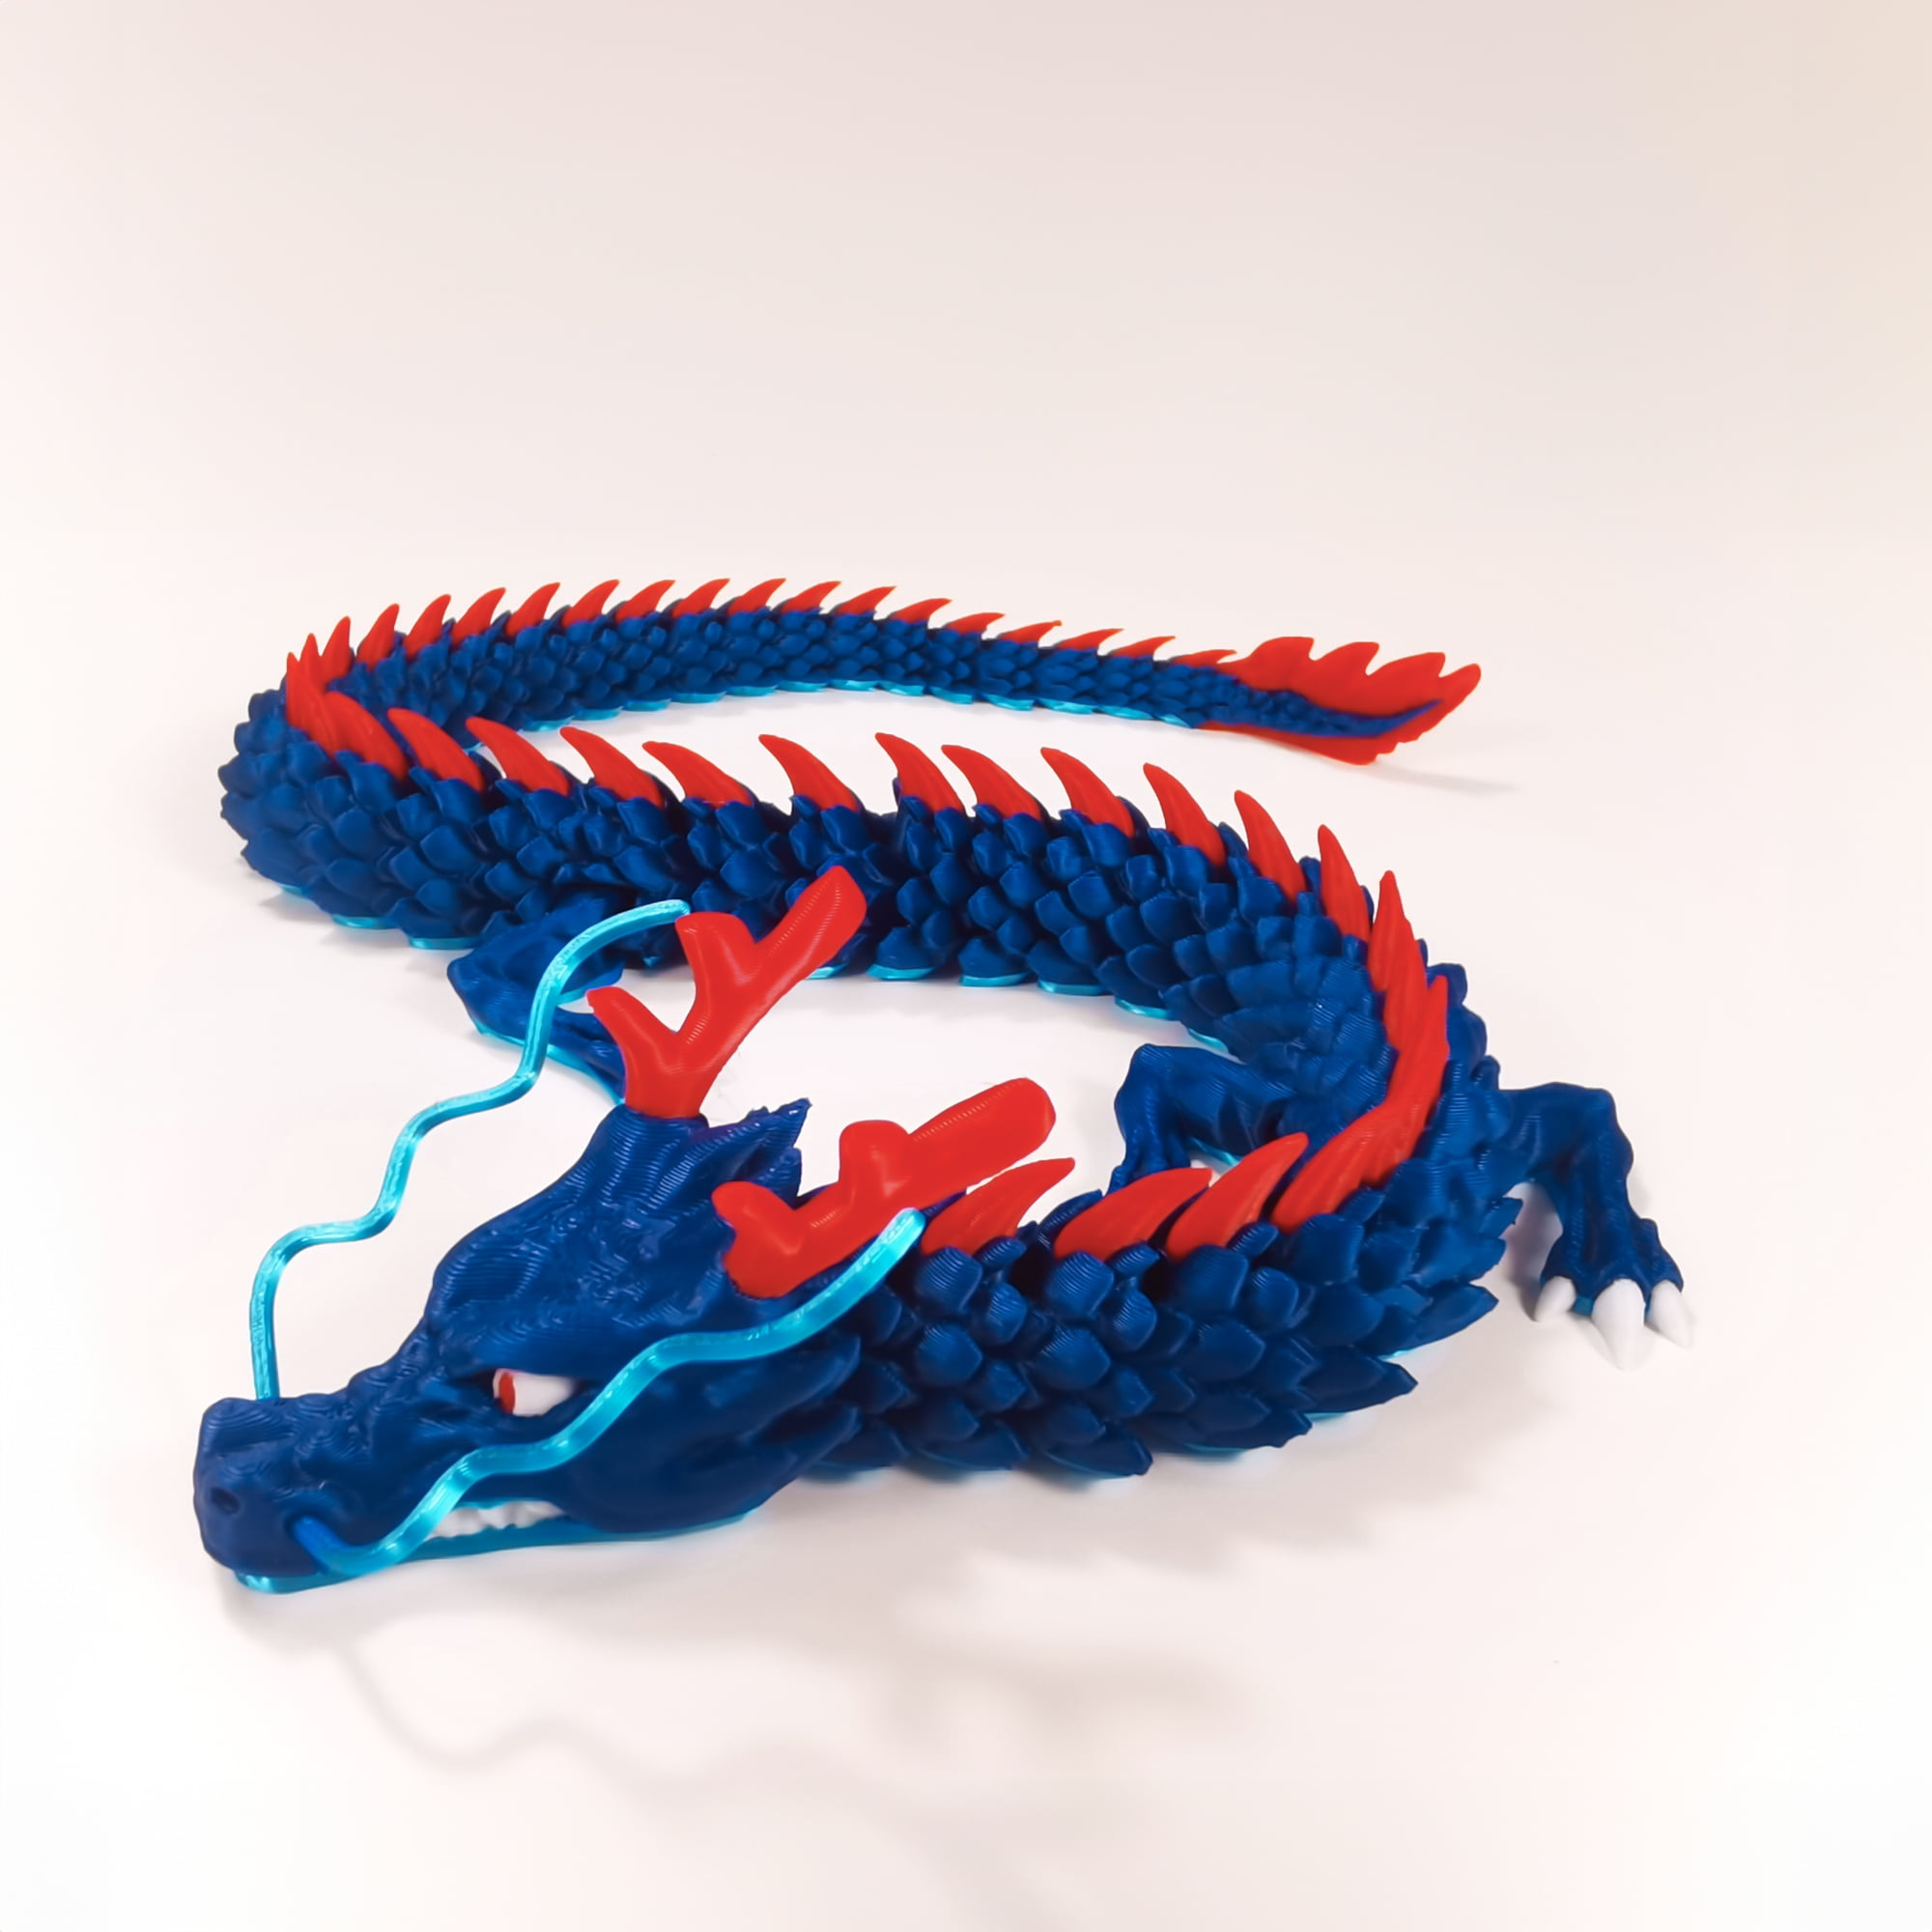 3D Printed Dragon, Articulated Dragon Fidget Toy Posable Flexible ...